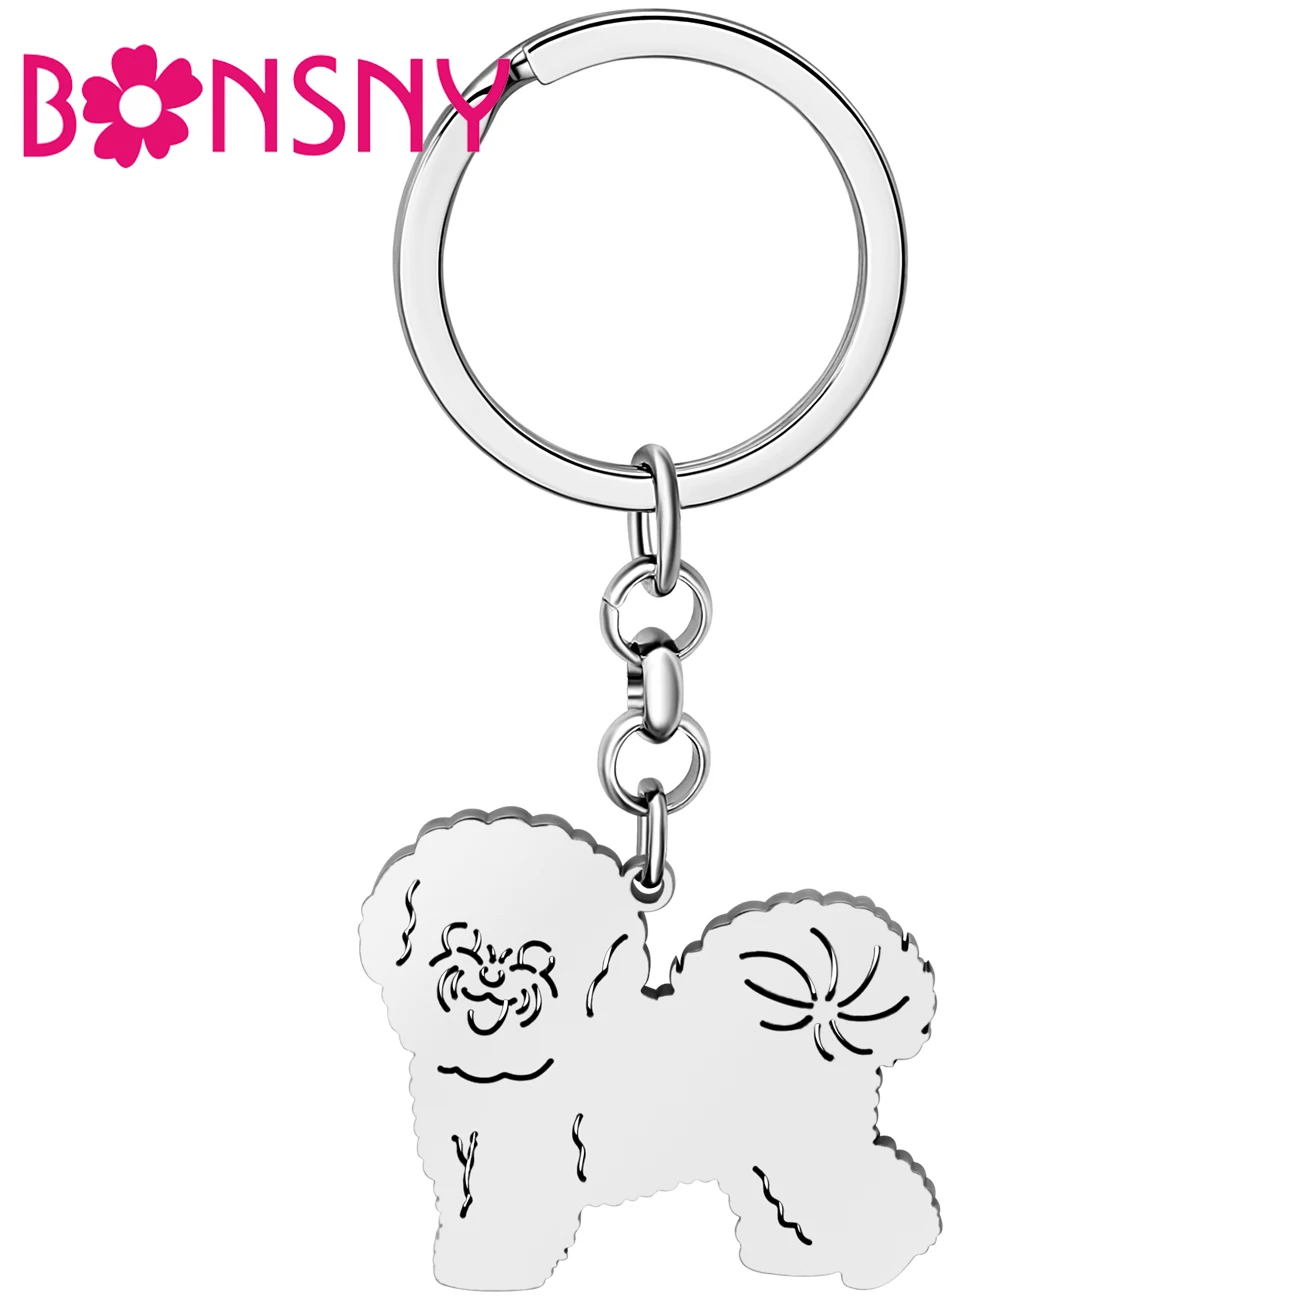 

Bonsny Stainless Steel Silver-plated Bichon Dog Key Chains Keychains Pet Animals Keyring Fashion Jewelry For Women Friend Gifts